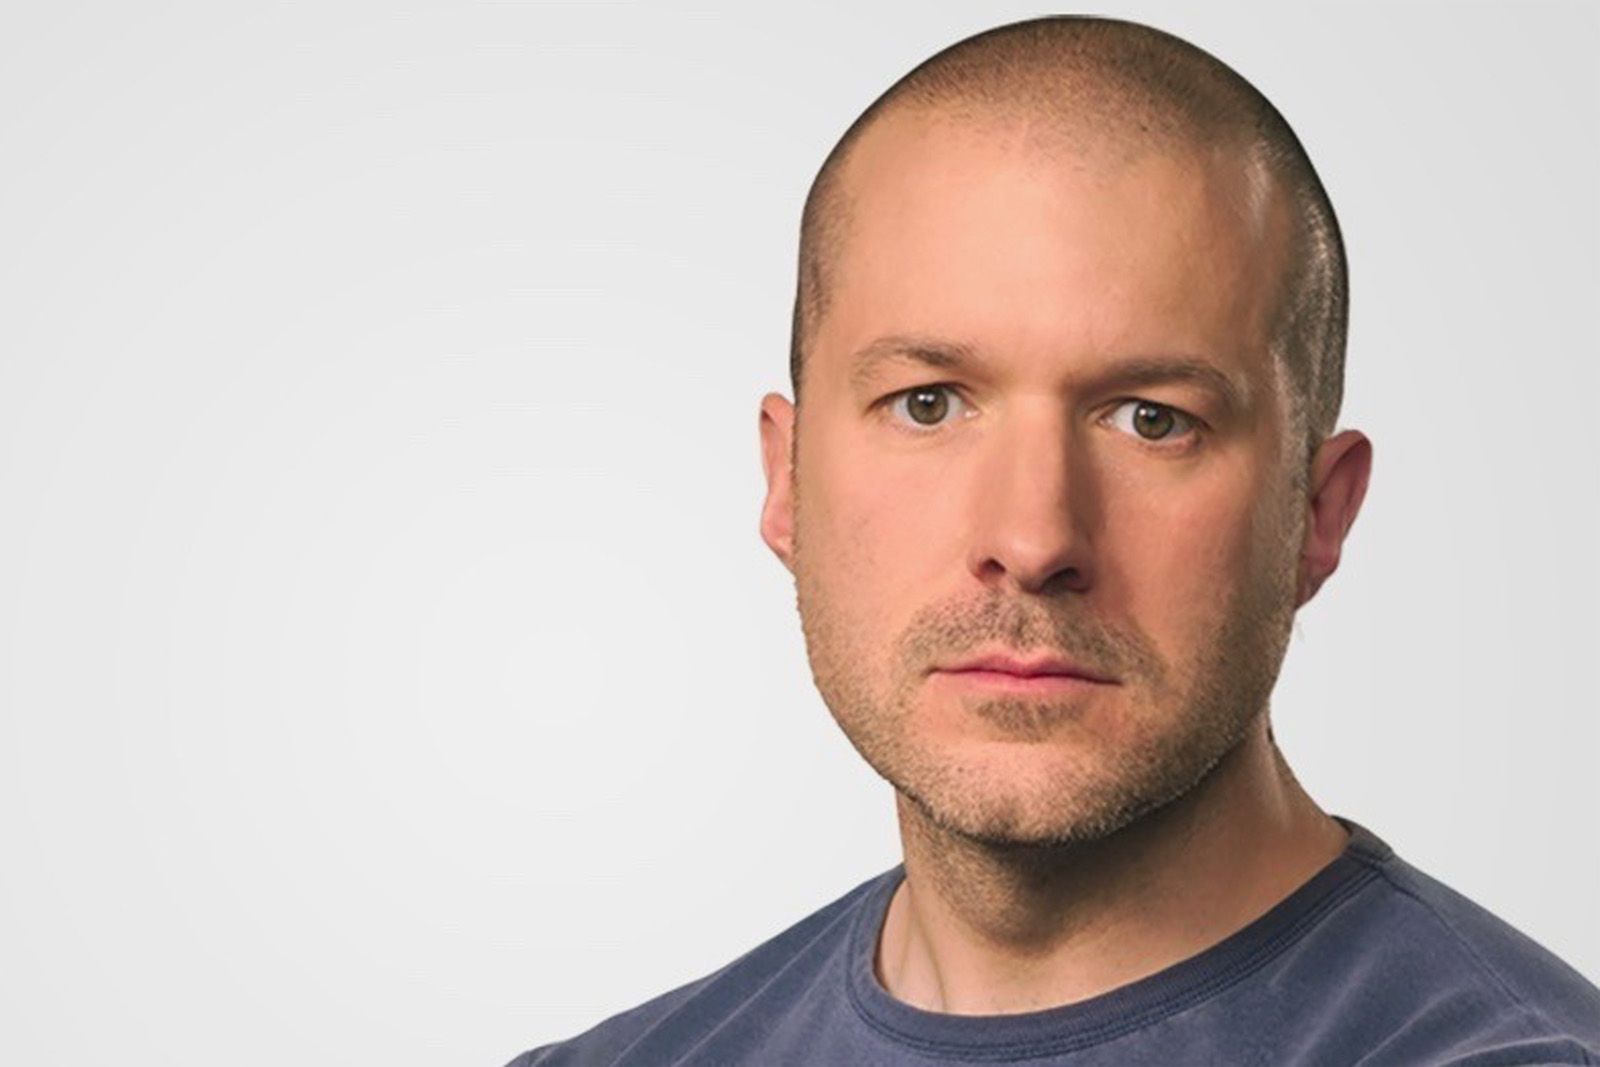 Jony Ive looks like hes left Apple as leadership page is updated without him image 1